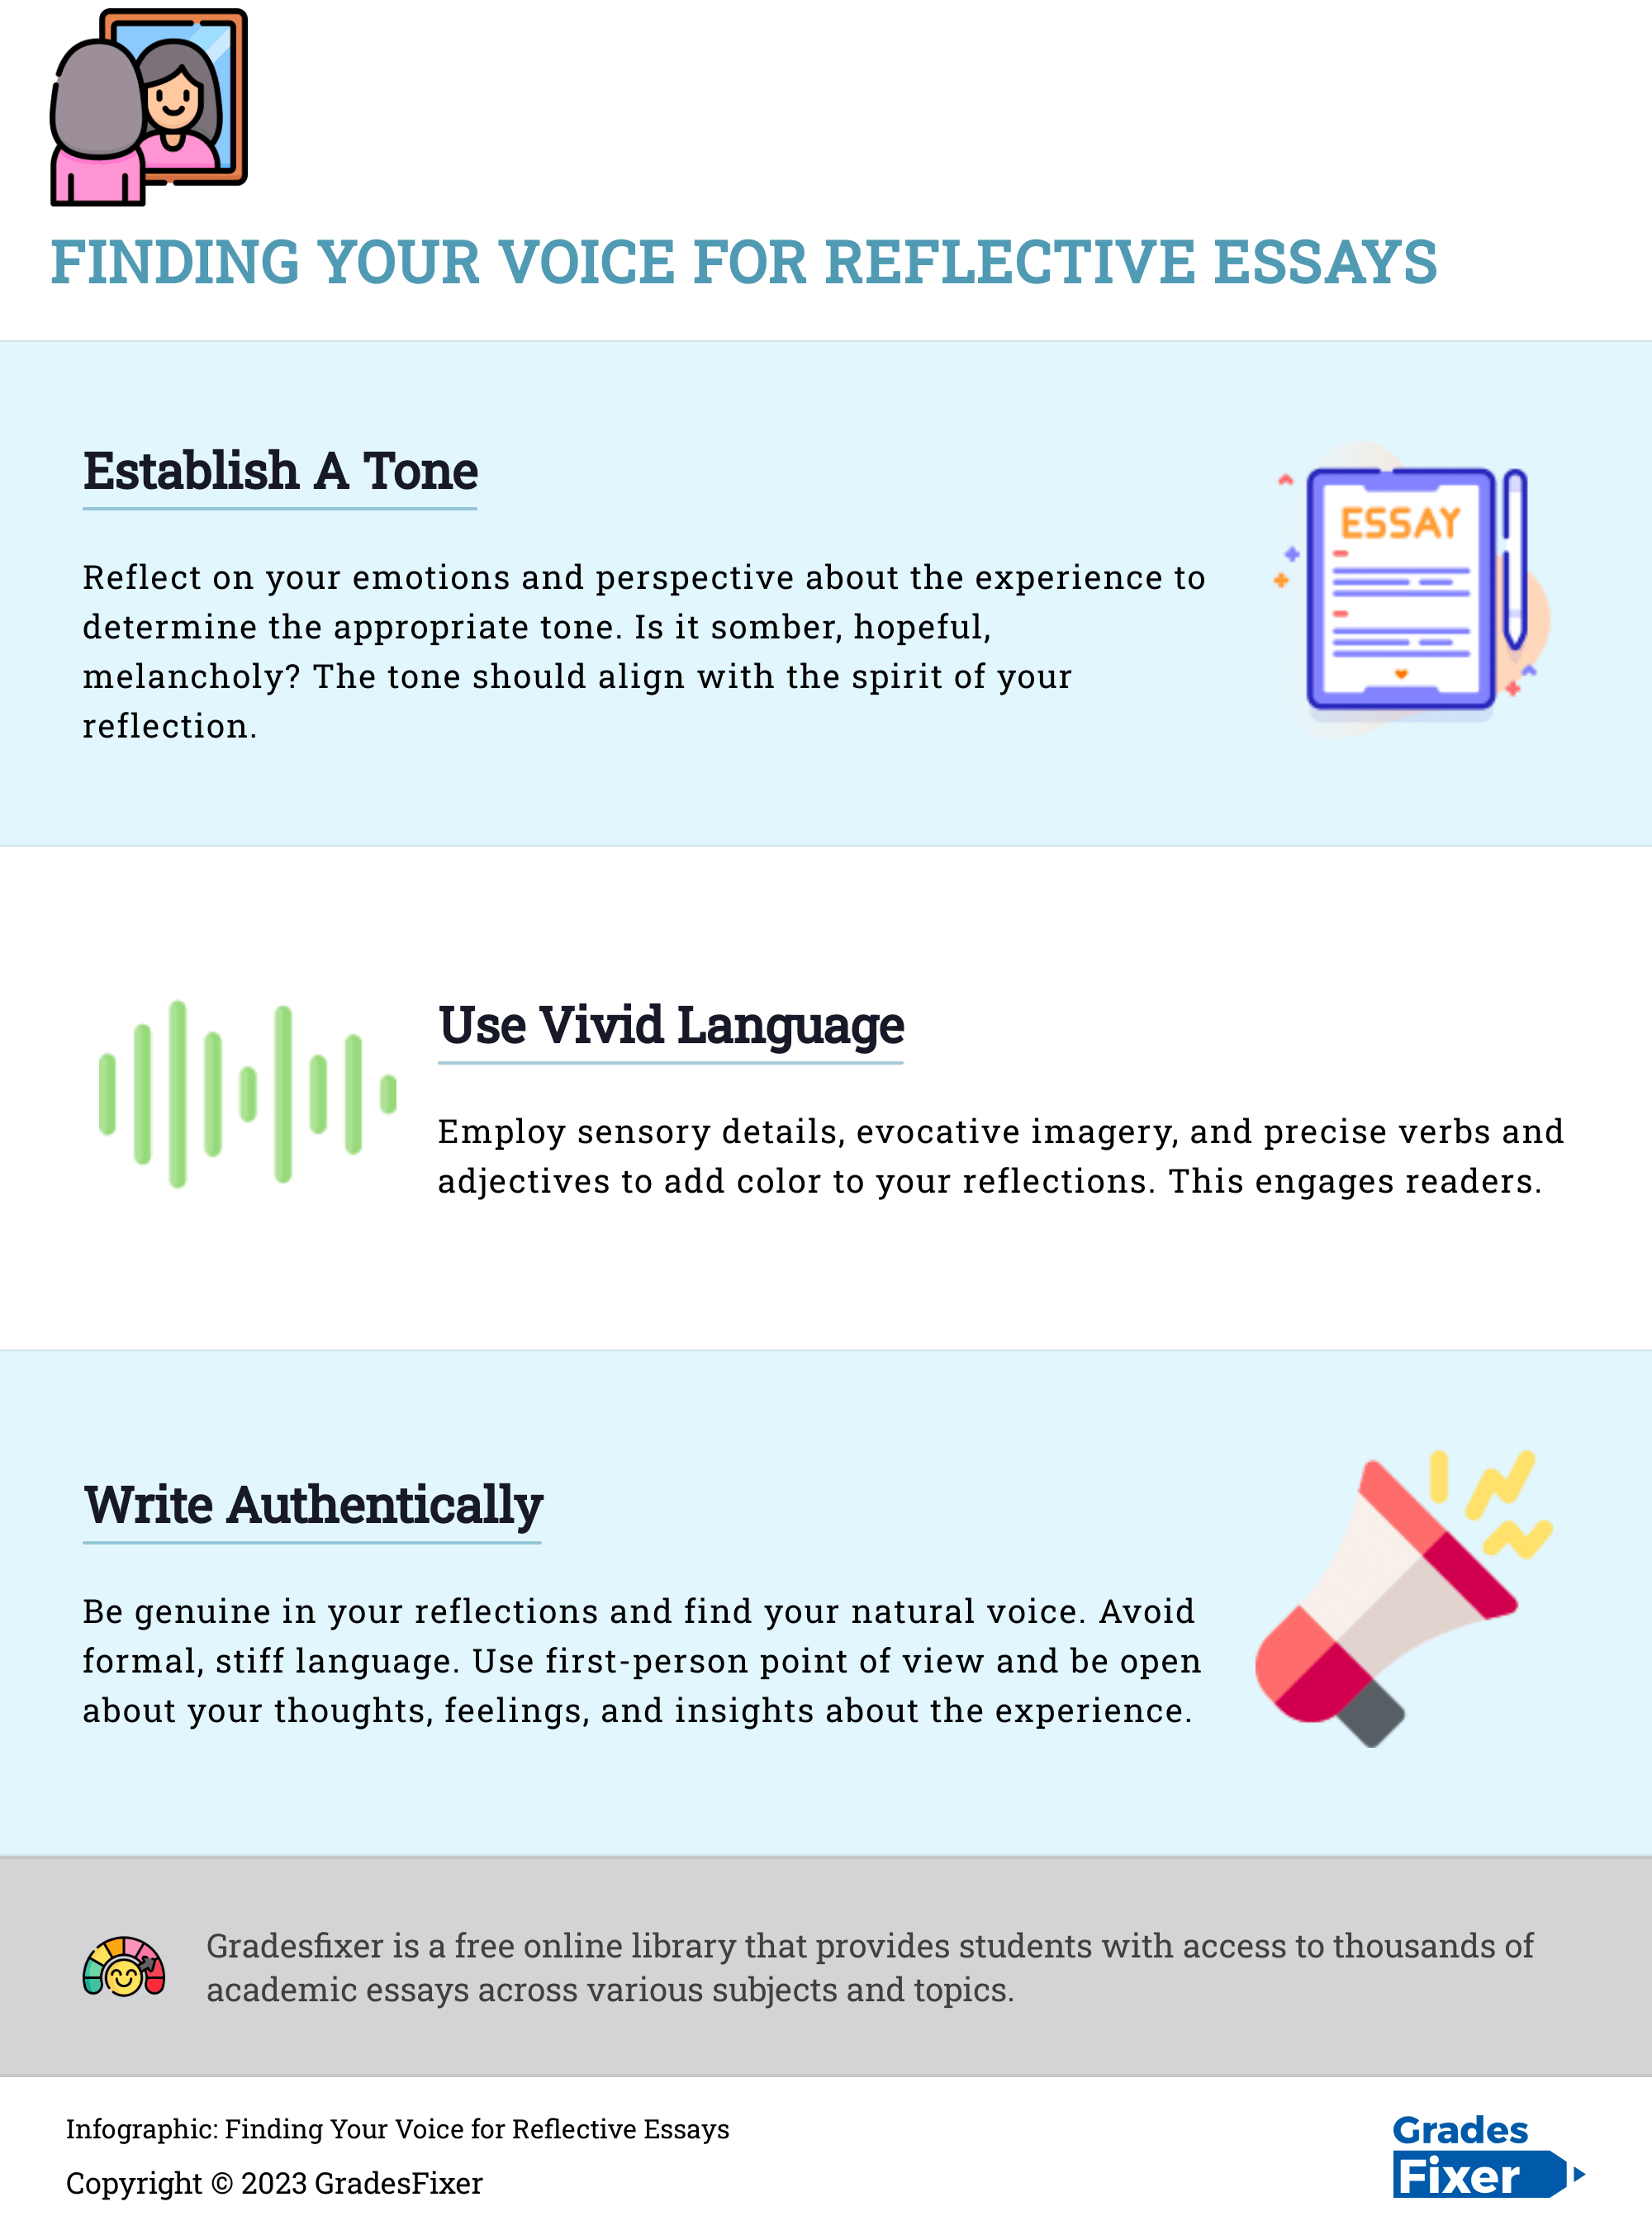 Infographic Finding Your Voice for Reflective Essay